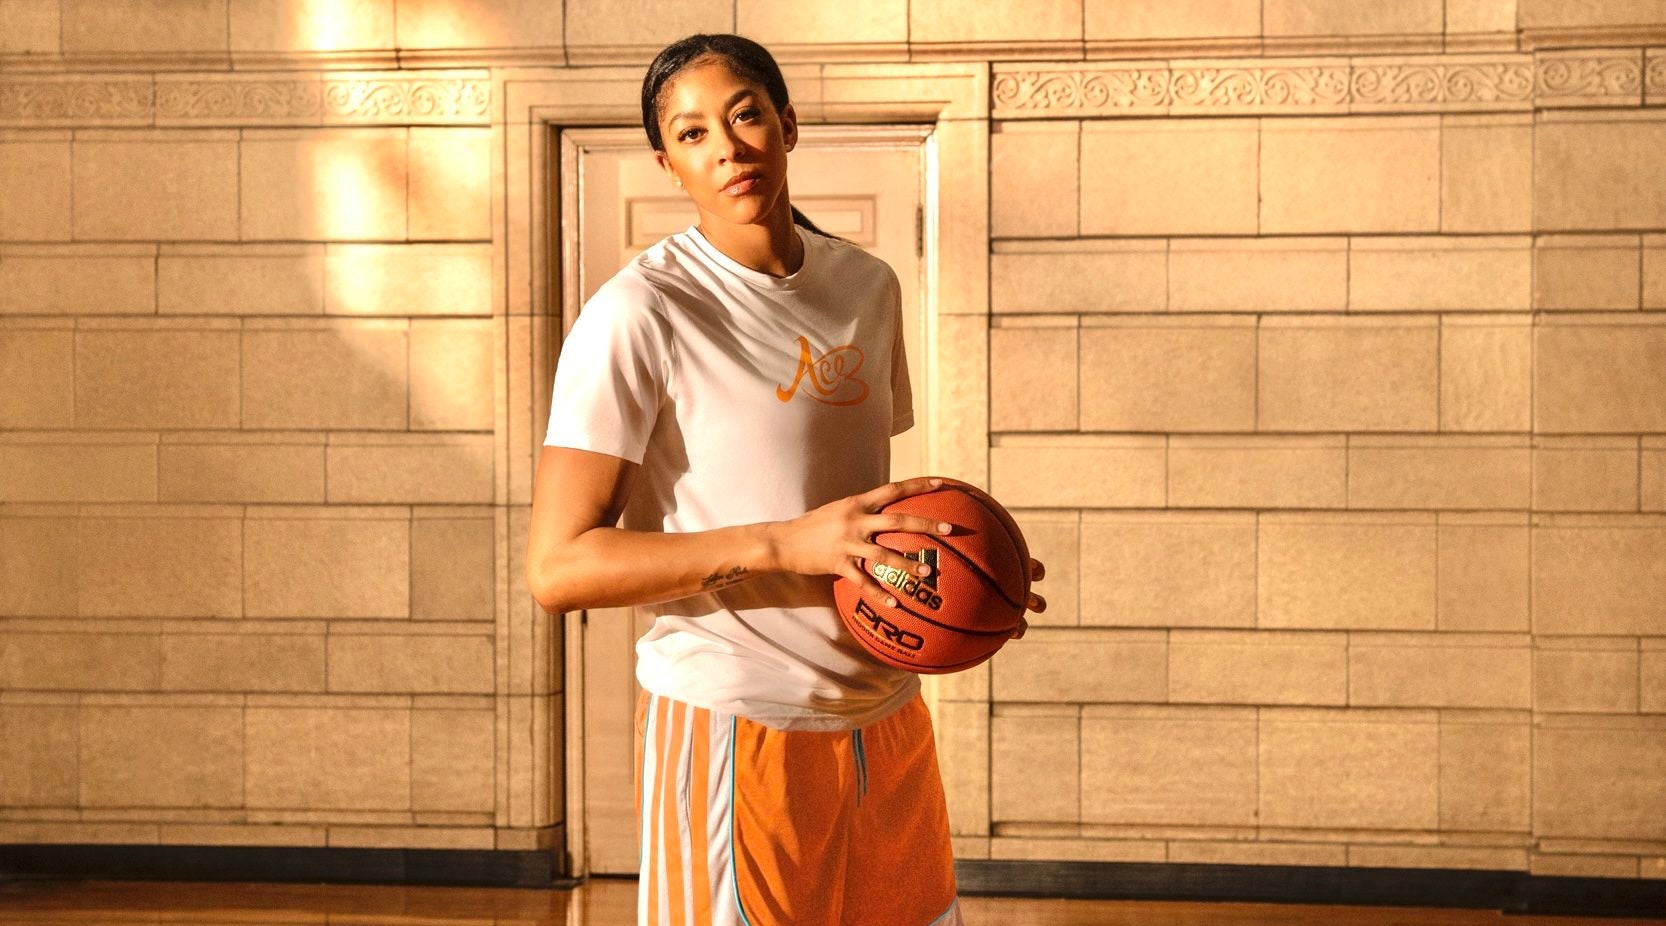 Candace Parker wants to play next season if she can get healthy